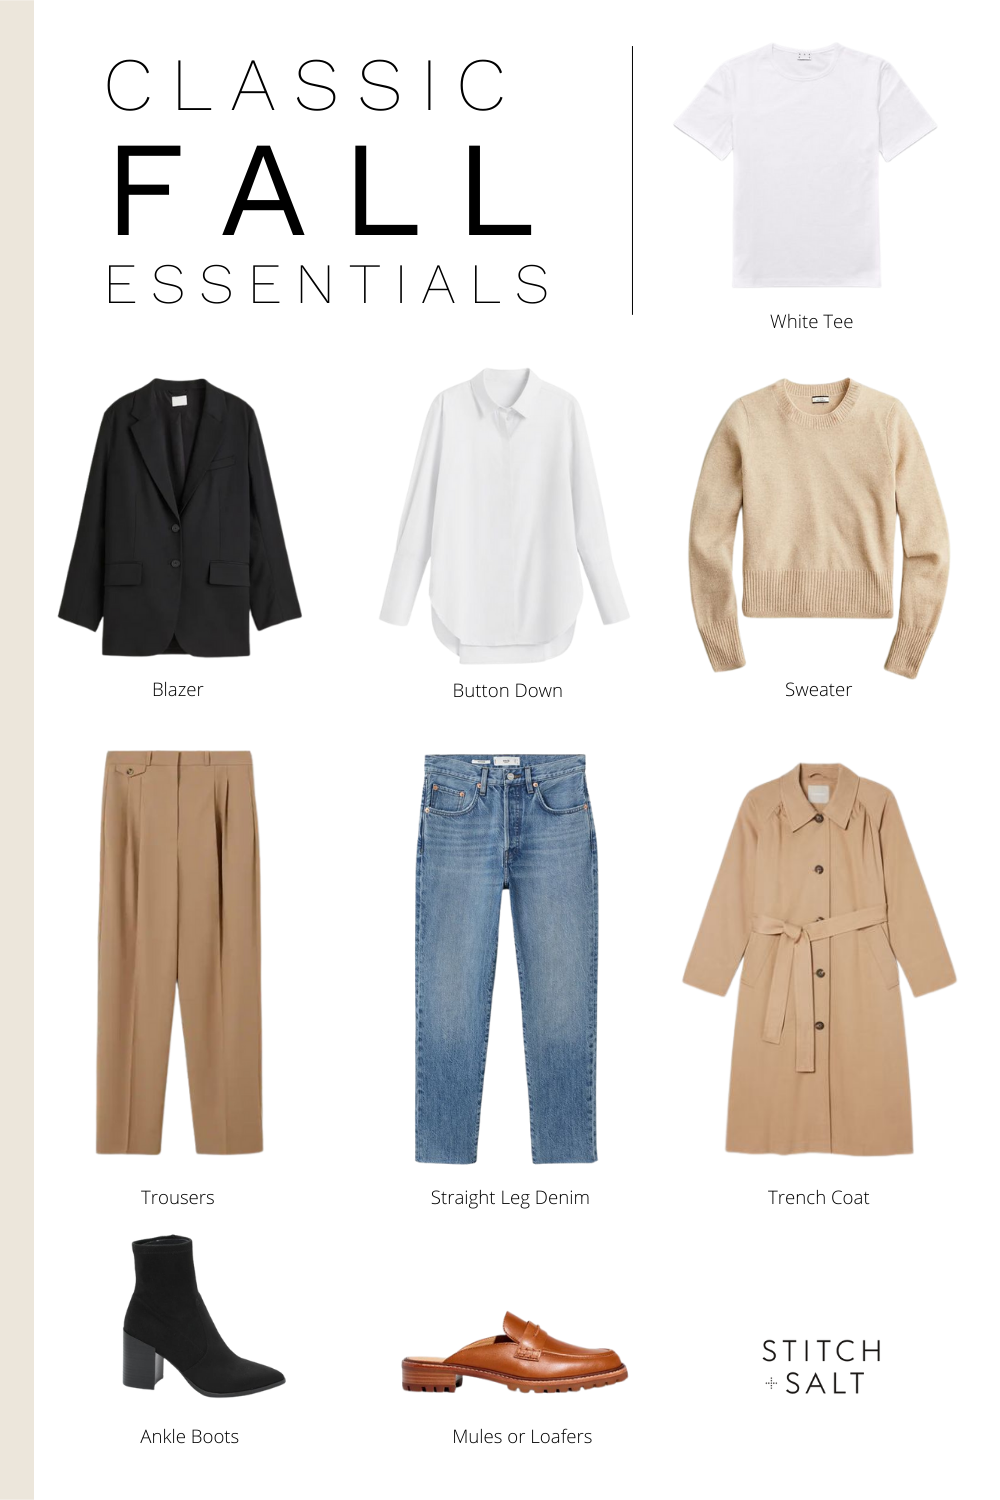 7 Must-Have Fall Essentials For Your Closet - Classy Yet Trendy